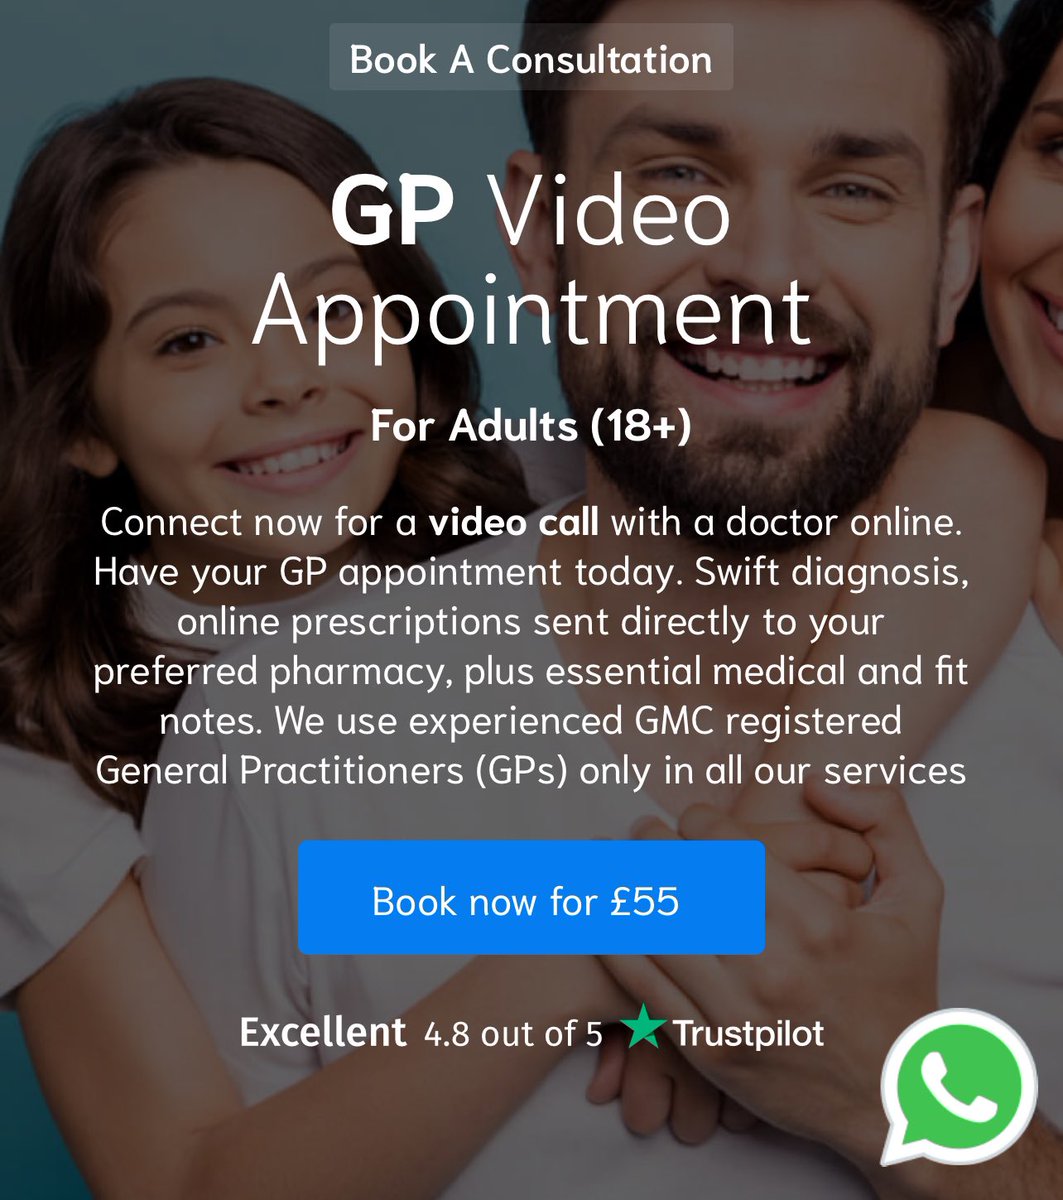 Pay £55 for a Private GP video call - GMC registered 🤔 NHSE pays £165 for all your GP services for a year Average number of appts is 7 with 5 being Face to Face £35 less than 2016 in real terms The Govt/NHSE don’t want you to see a NHS GP & refuse to fund GPs just alternatives